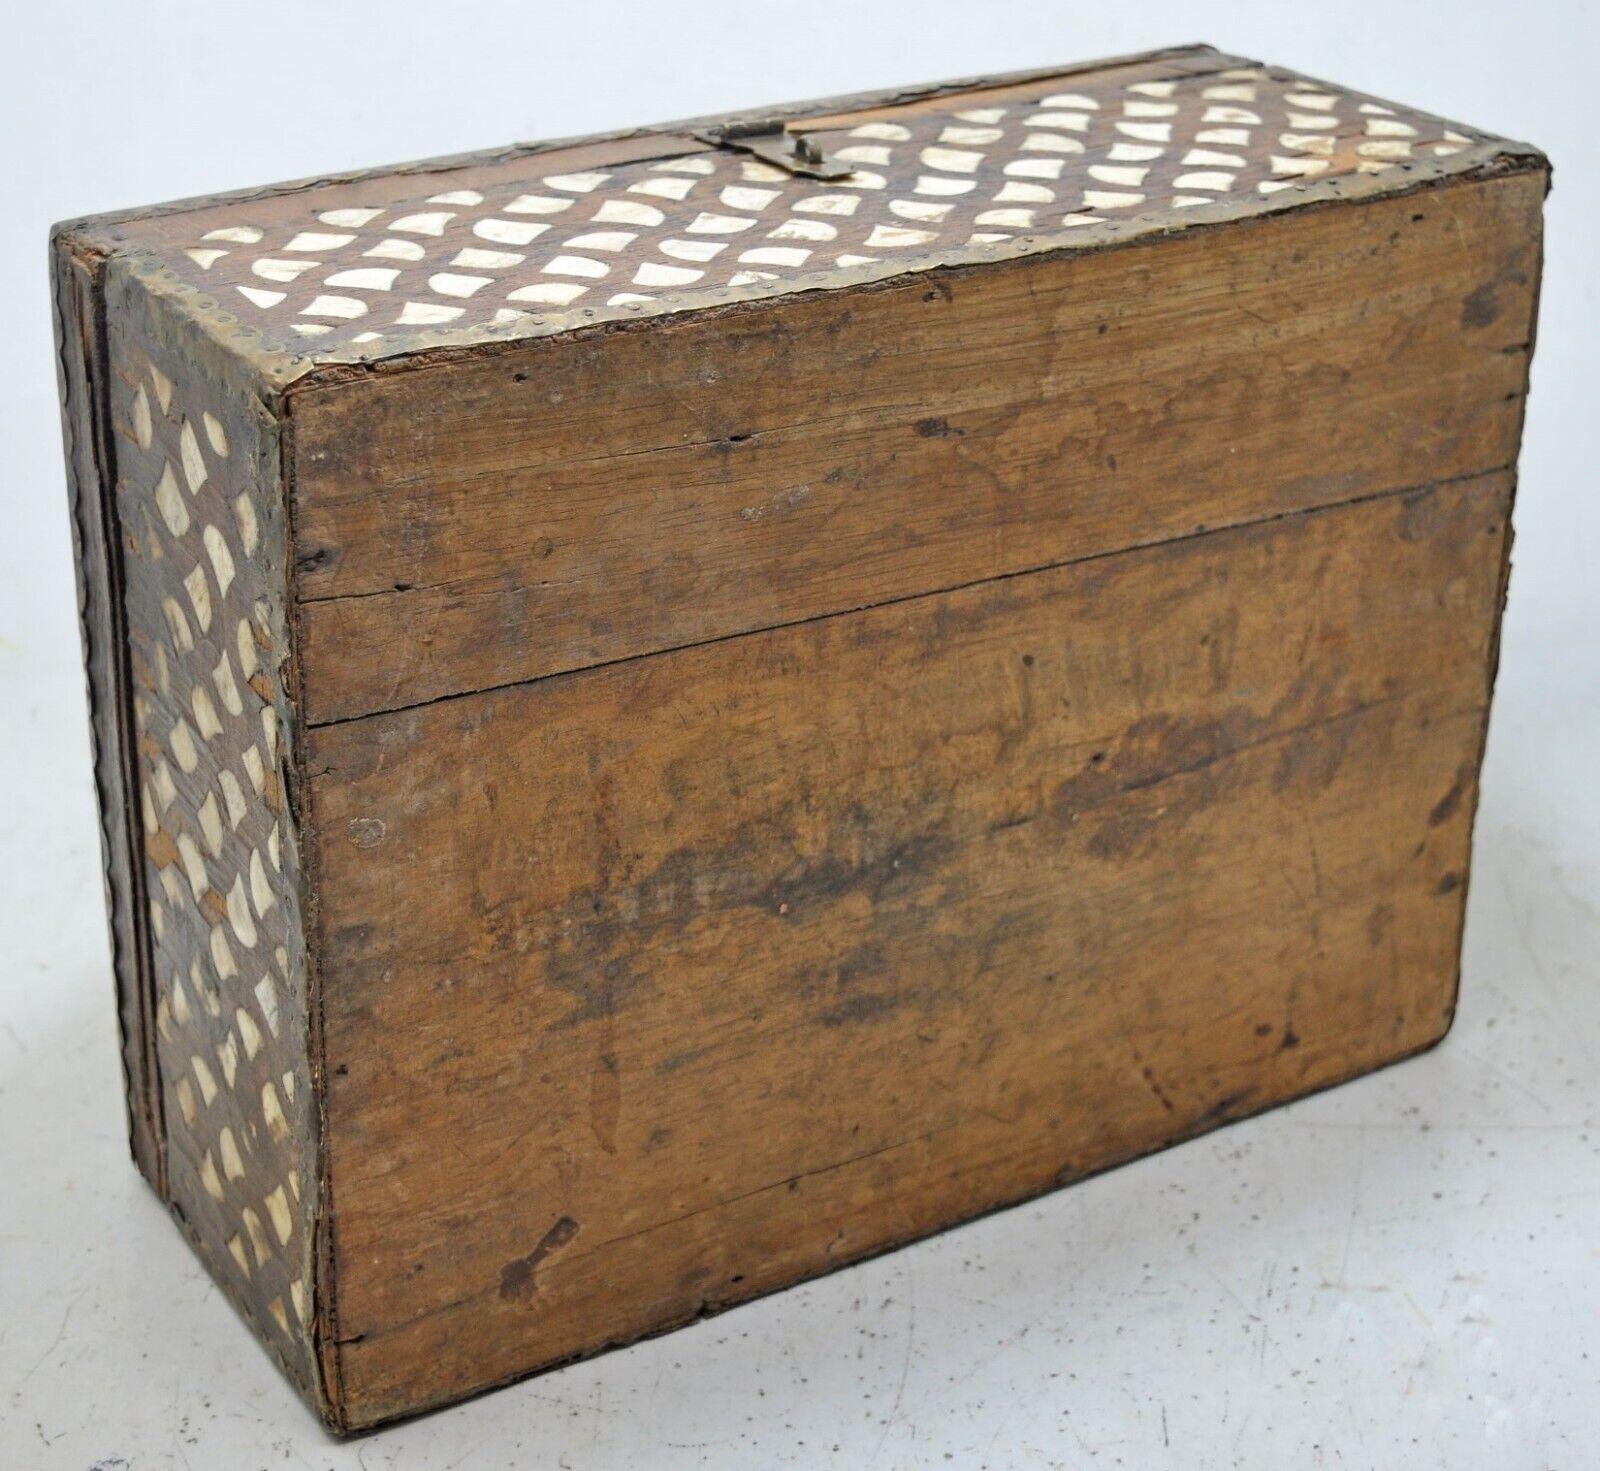 Antique Hand-Crafted Decorative Box with Distinctive Bone Inlay Pattern  For Sale 3